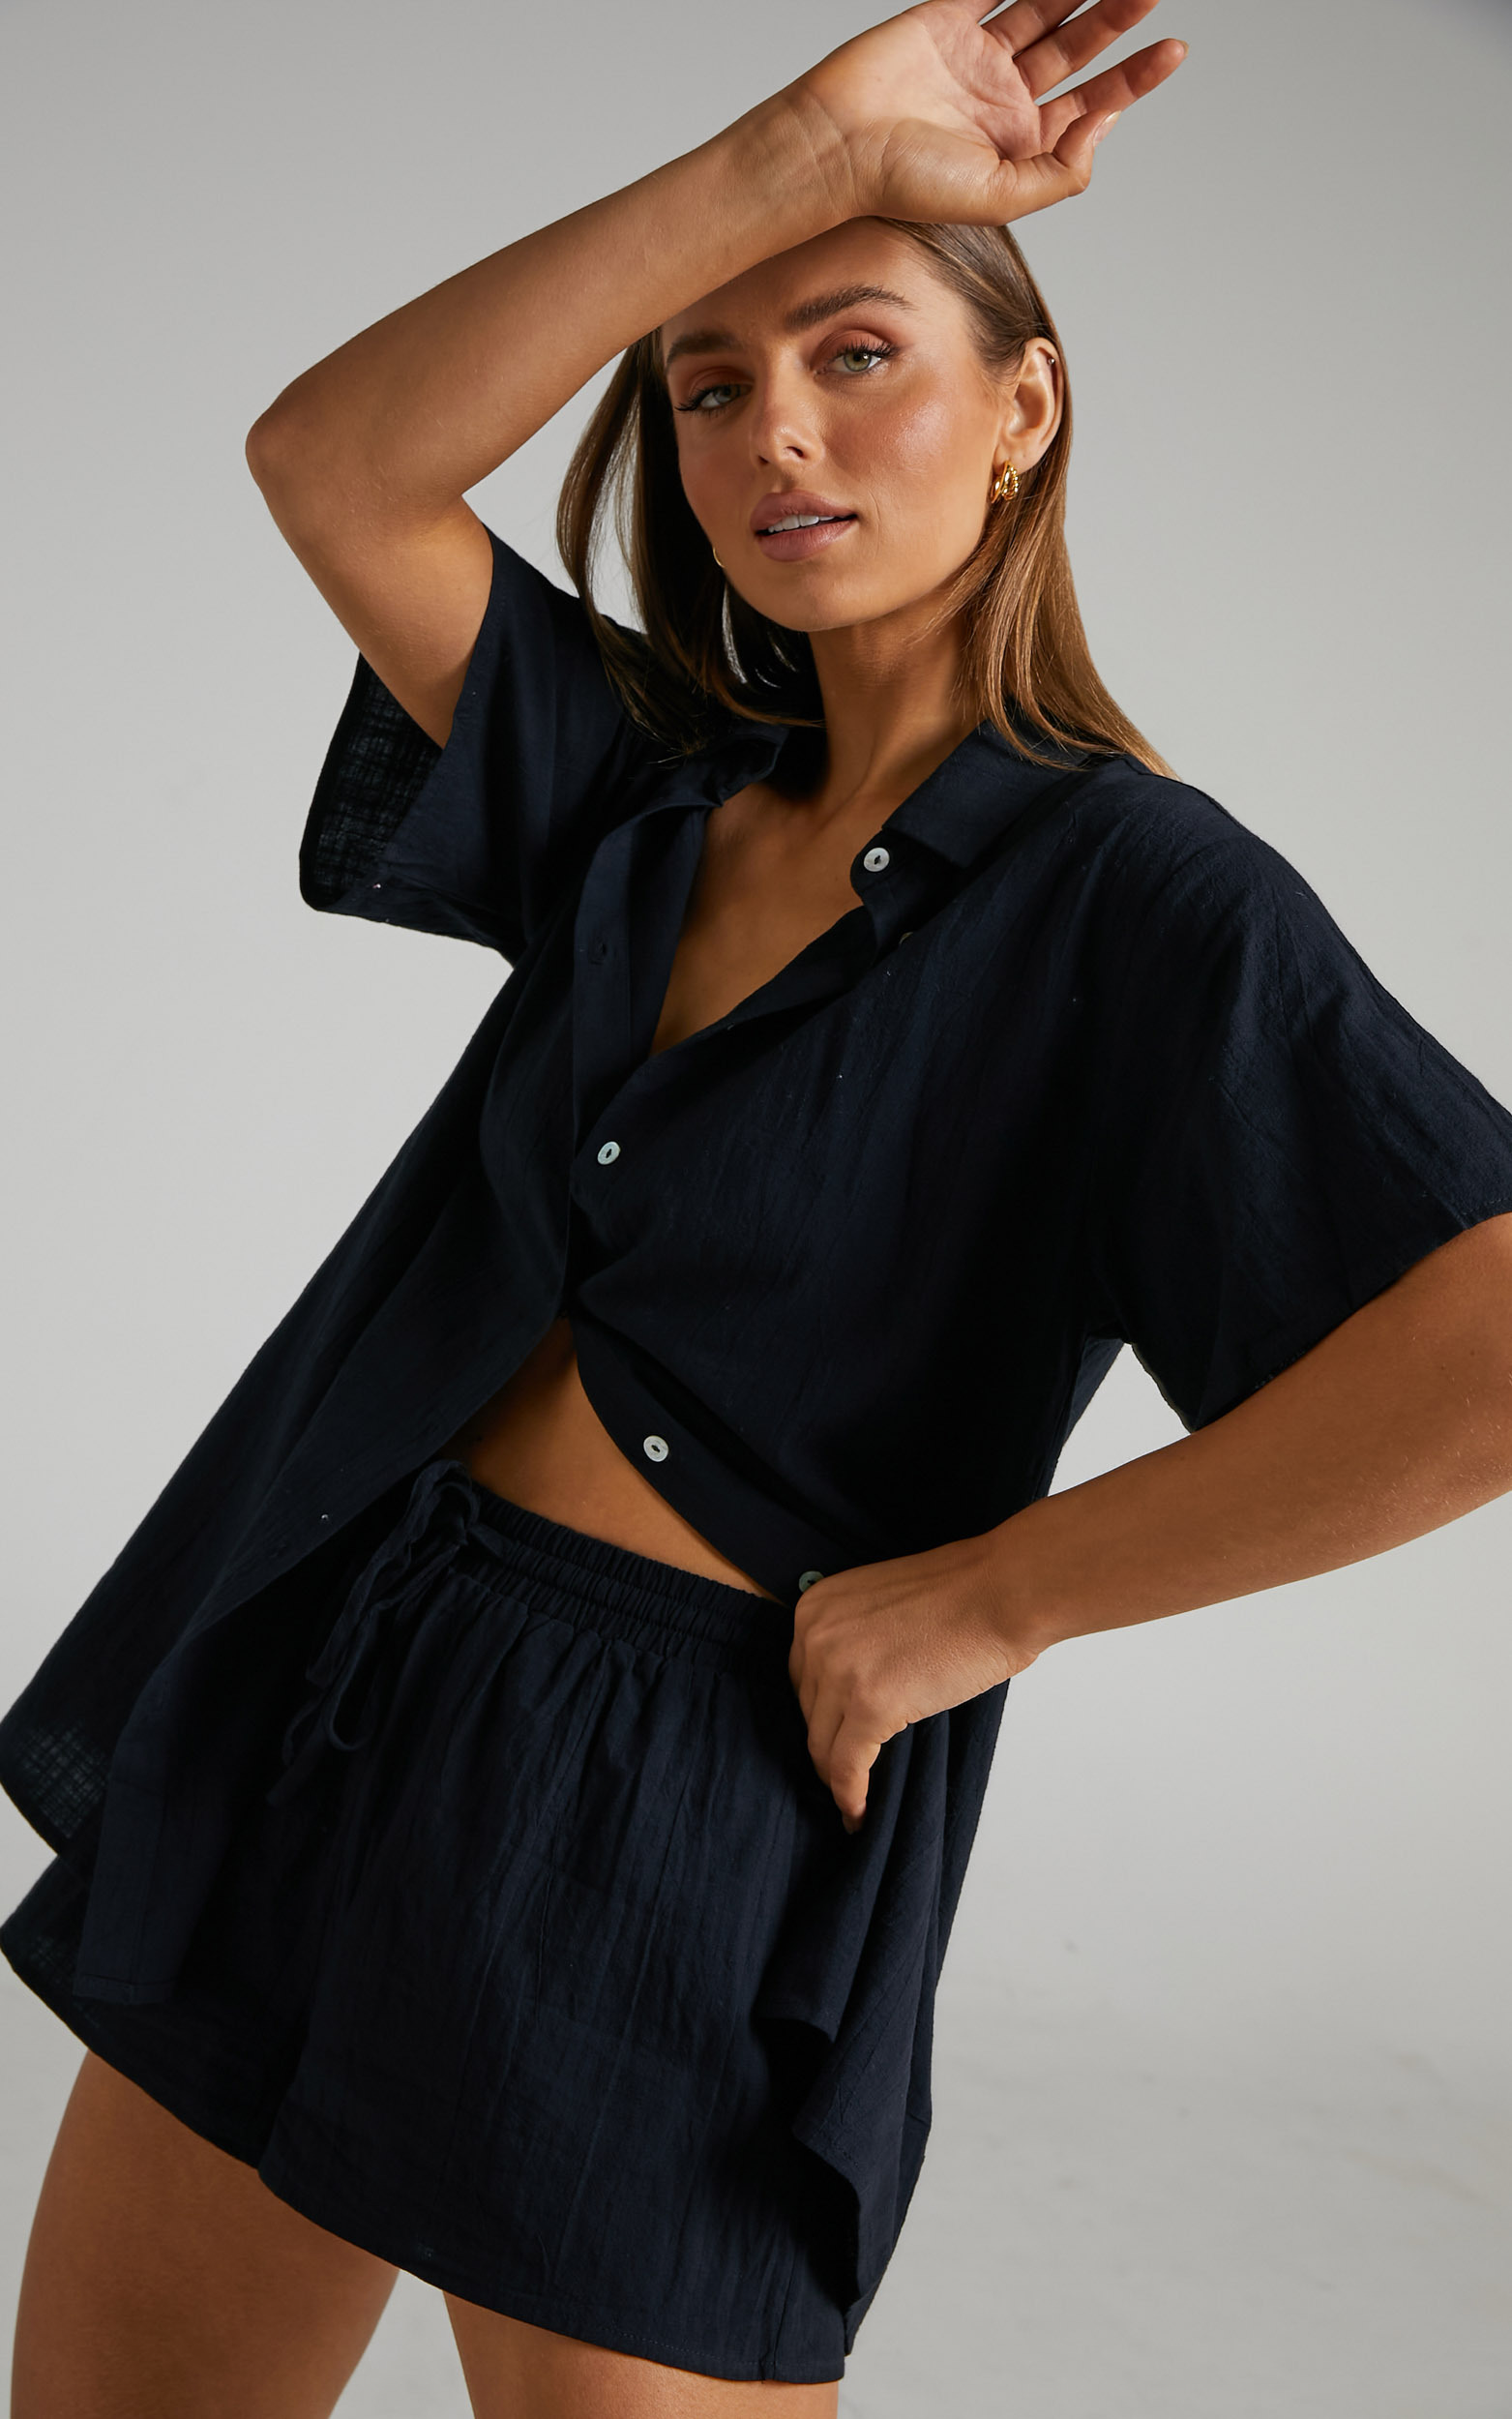 Vina del Mar Button Up Shirt and Shorts Two Piece Set in Black - 08, BLK1, hi-res image number null